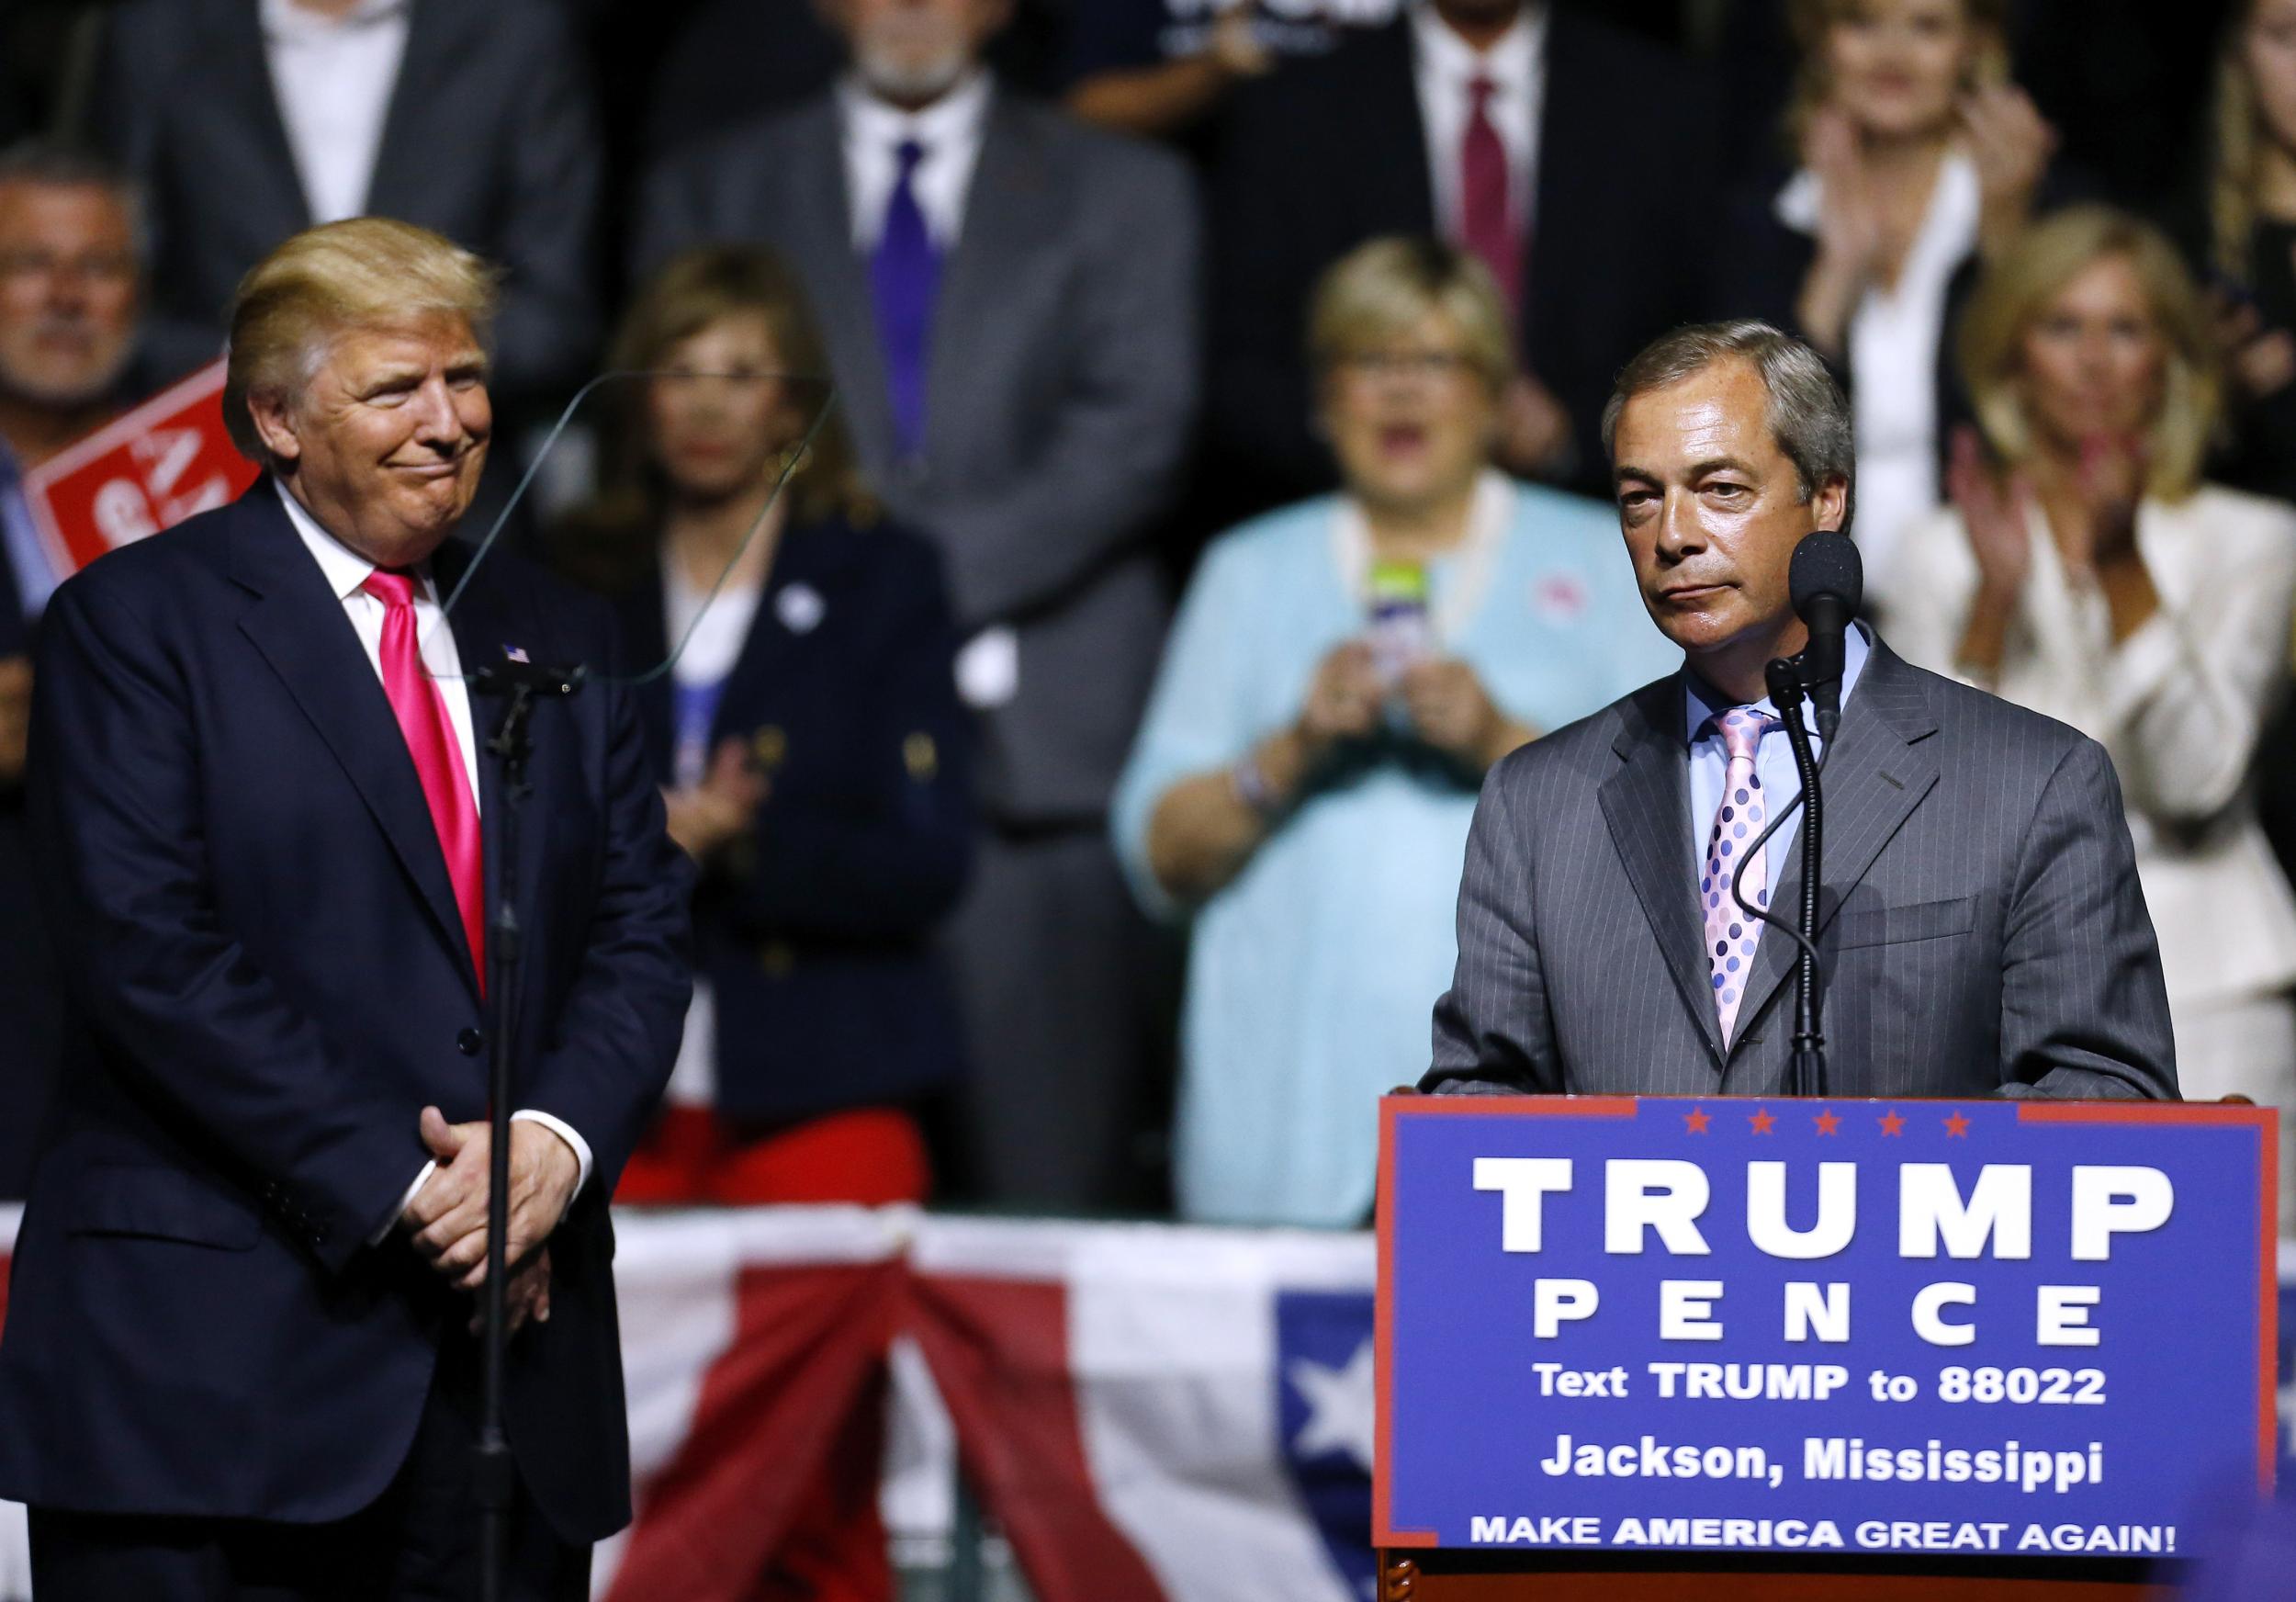 Nigel Farage did not explicitly endorse Donald Trump but now admits he hopes the President-elect will give him a job